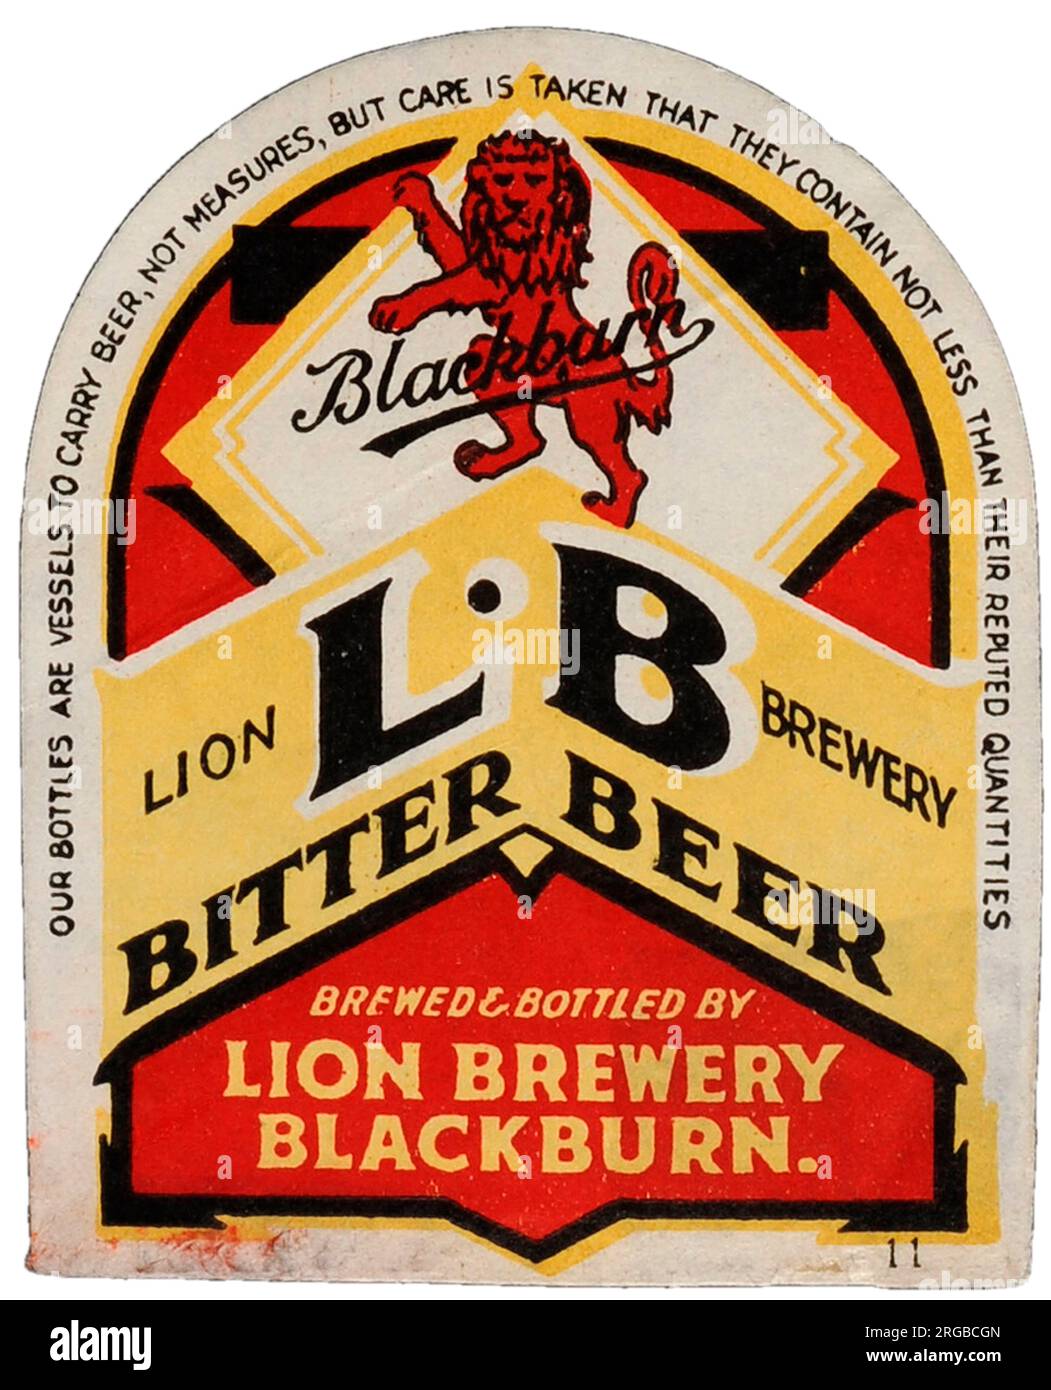 Lion Brewery Bitter Beer Stock Photo